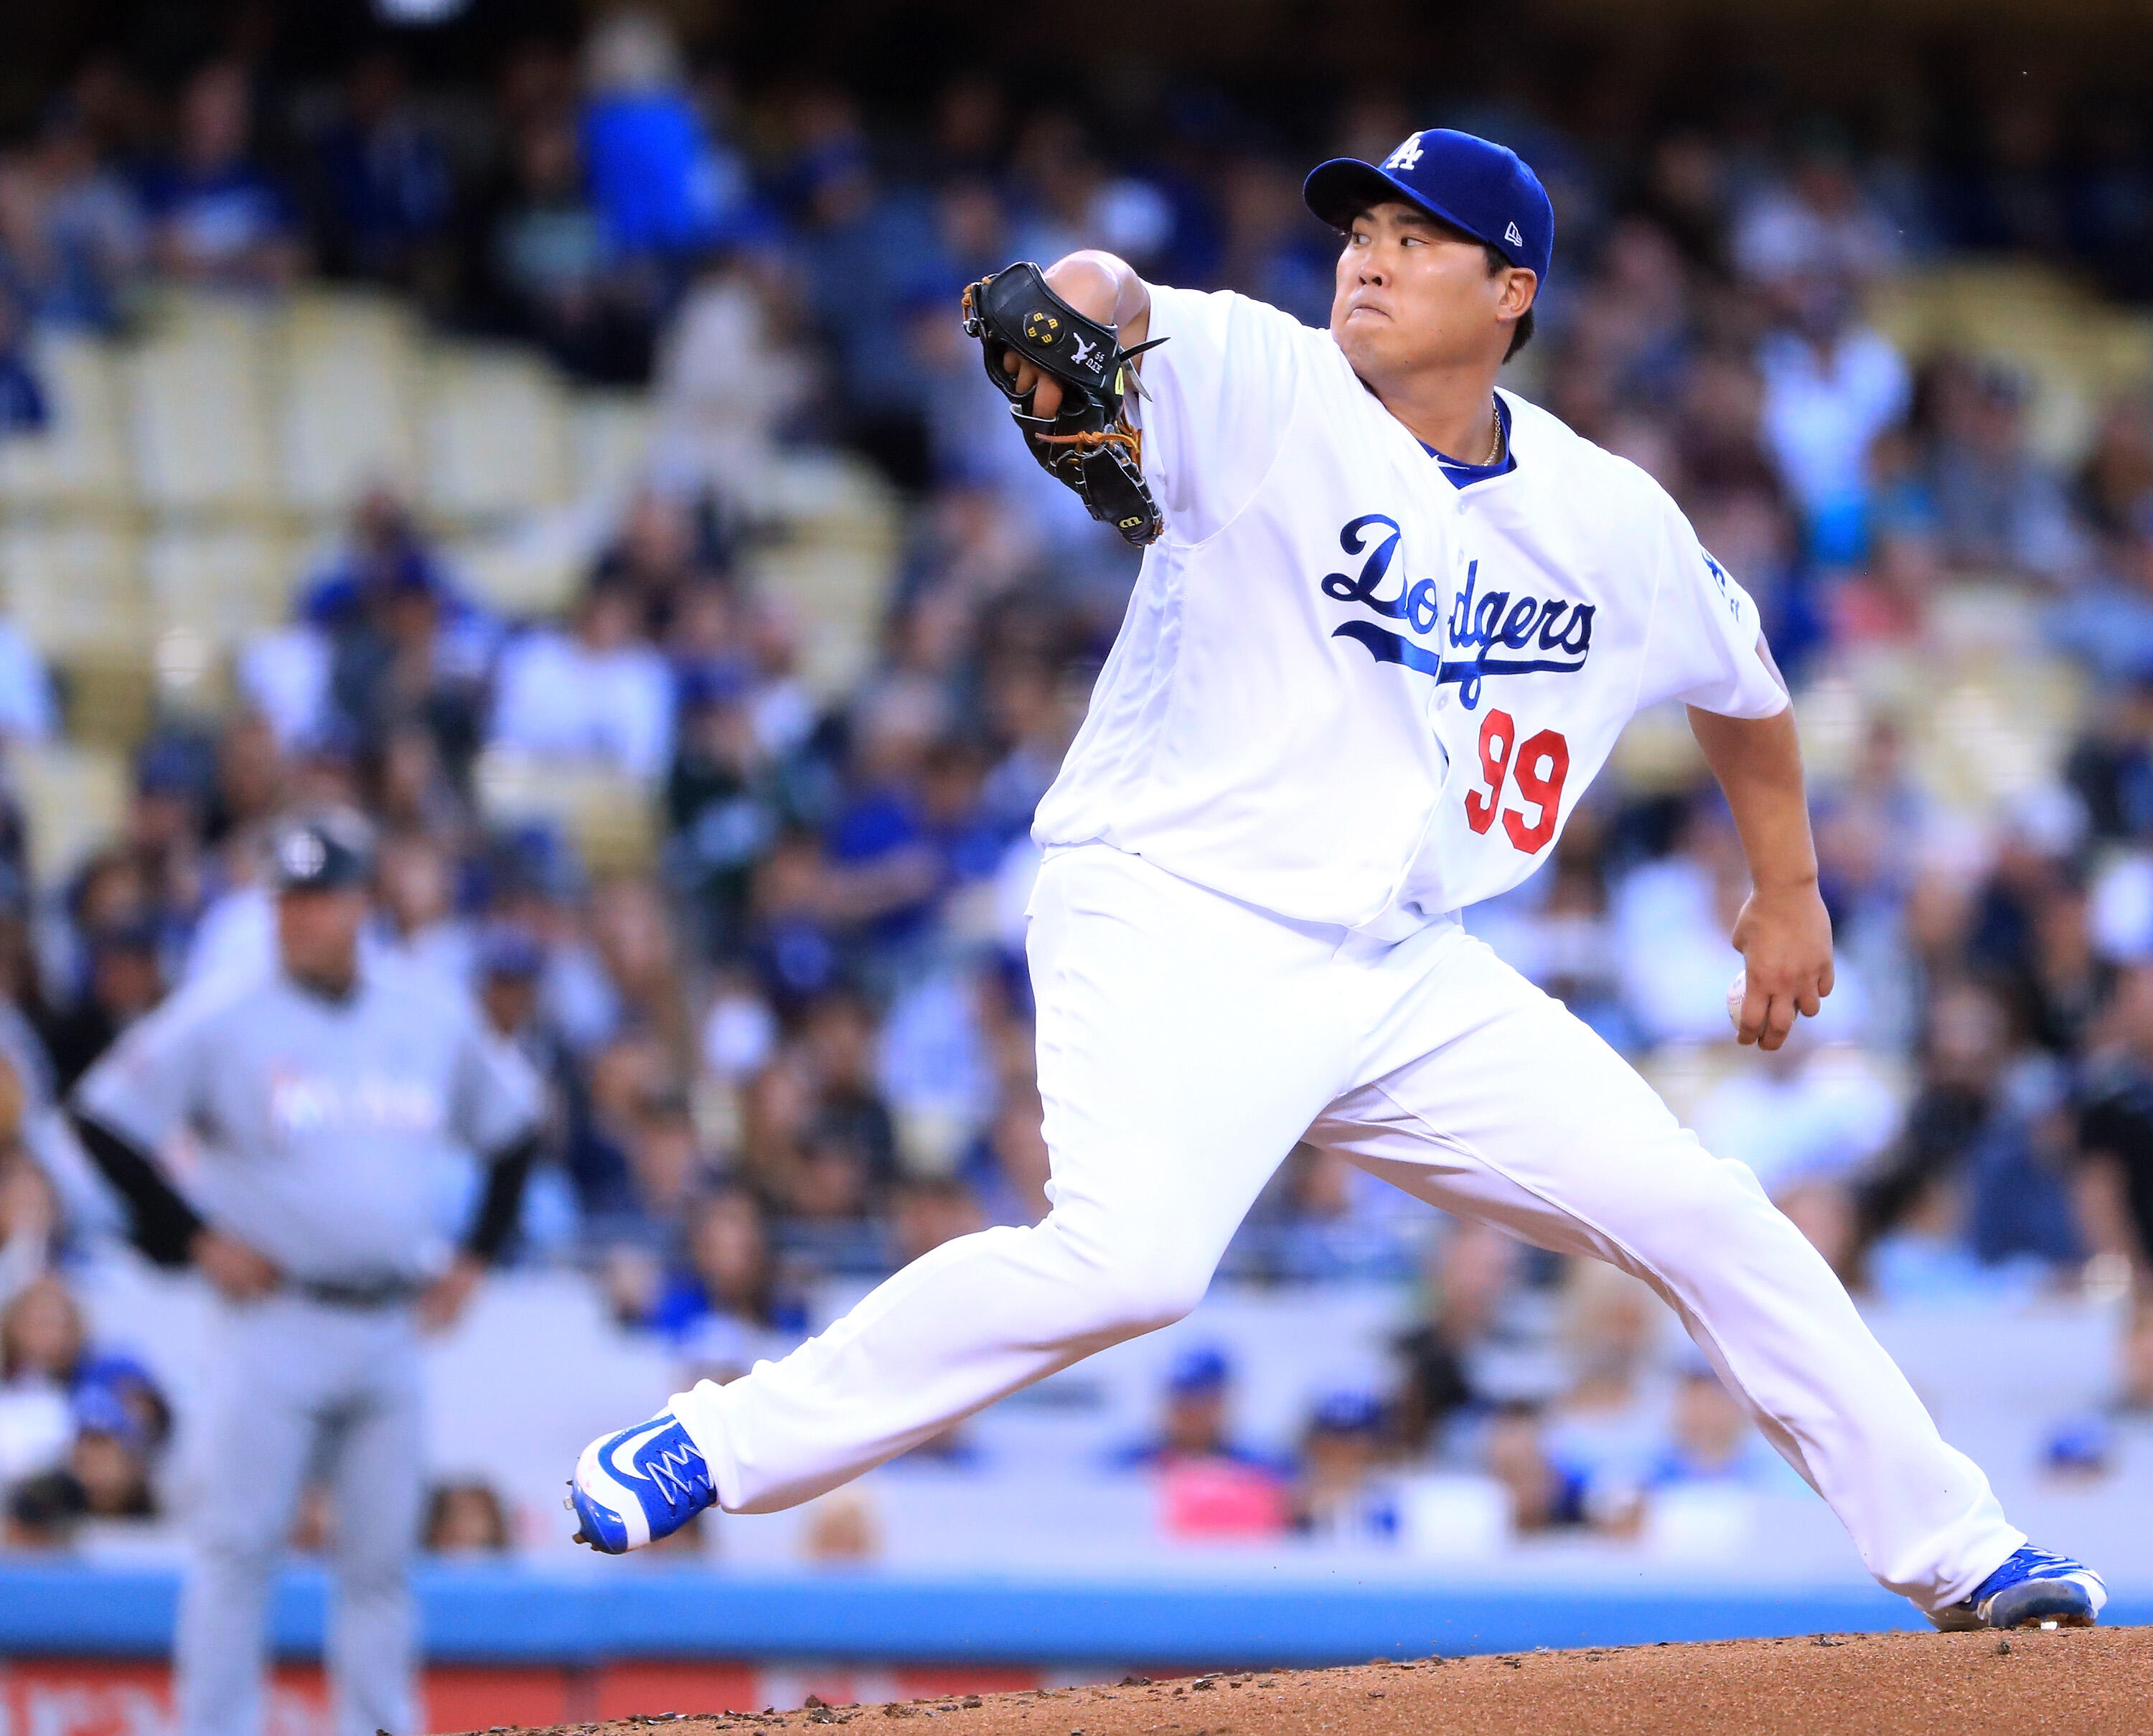 LOS ANGELES, CA - MAY 18:  Hyun-Jin Ryu #99 of the Los Angeles Dodgers pitches to the Miami Marlins during the second inning at Dodger Stadium on May 18, 2017 in Los Angeles, California.  (Photo by Harry How/Getty Images)